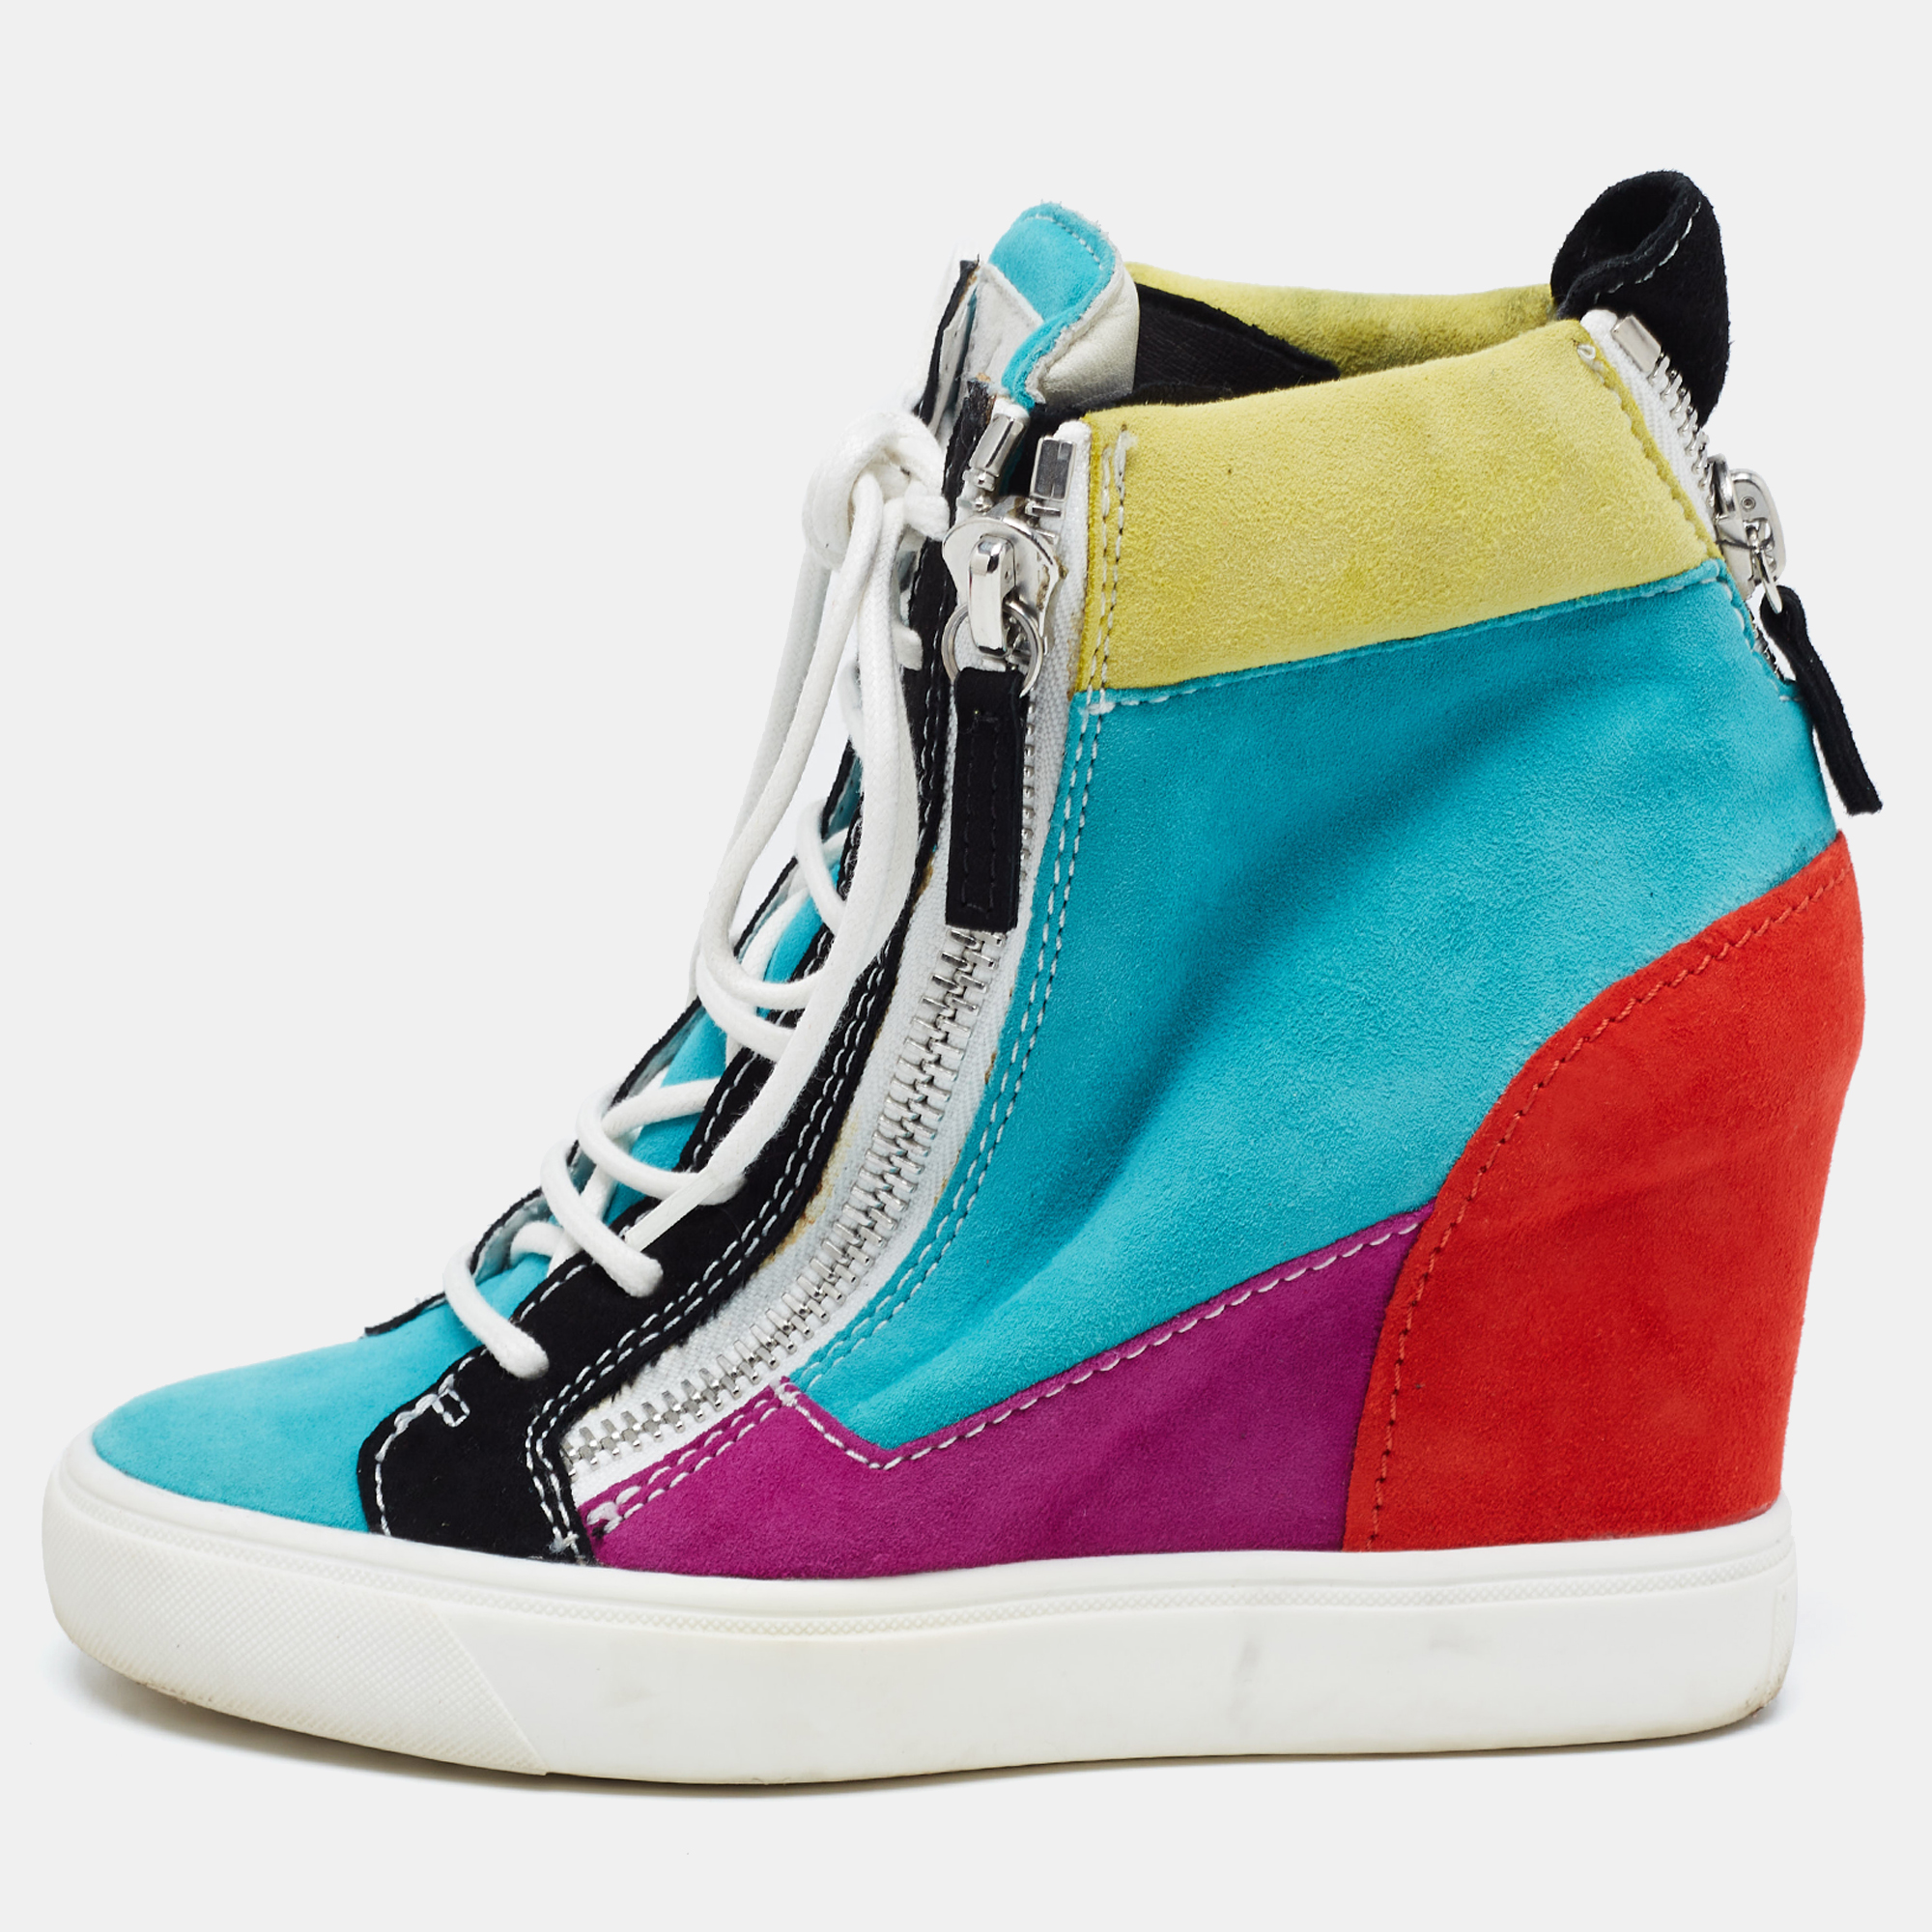 Pre-owned Giuseppe Zanotti Multicolor Suede High Top Sneakers Size 35